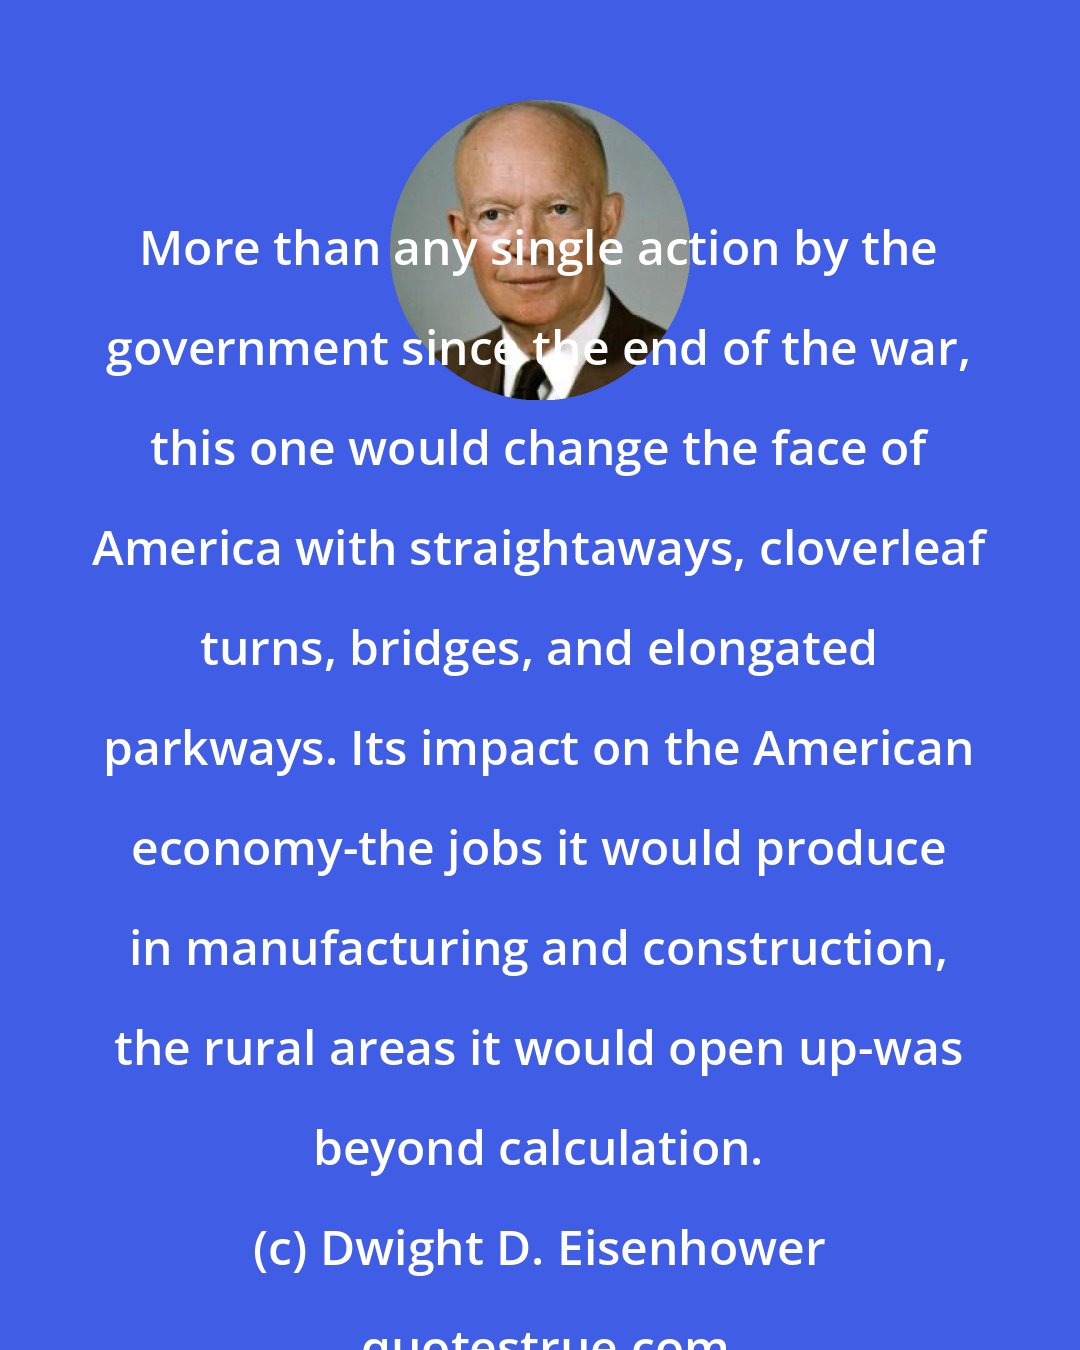 Dwight D. Eisenhower: More than any single action by the government since the end of the war, this one would change the face of America with straightaways, cloverleaf turns, bridges, and elongated parkways. Its impact on the American economy-the jobs it would produce in manufacturing and construction, the rural areas it would open up-was beyond calculation.